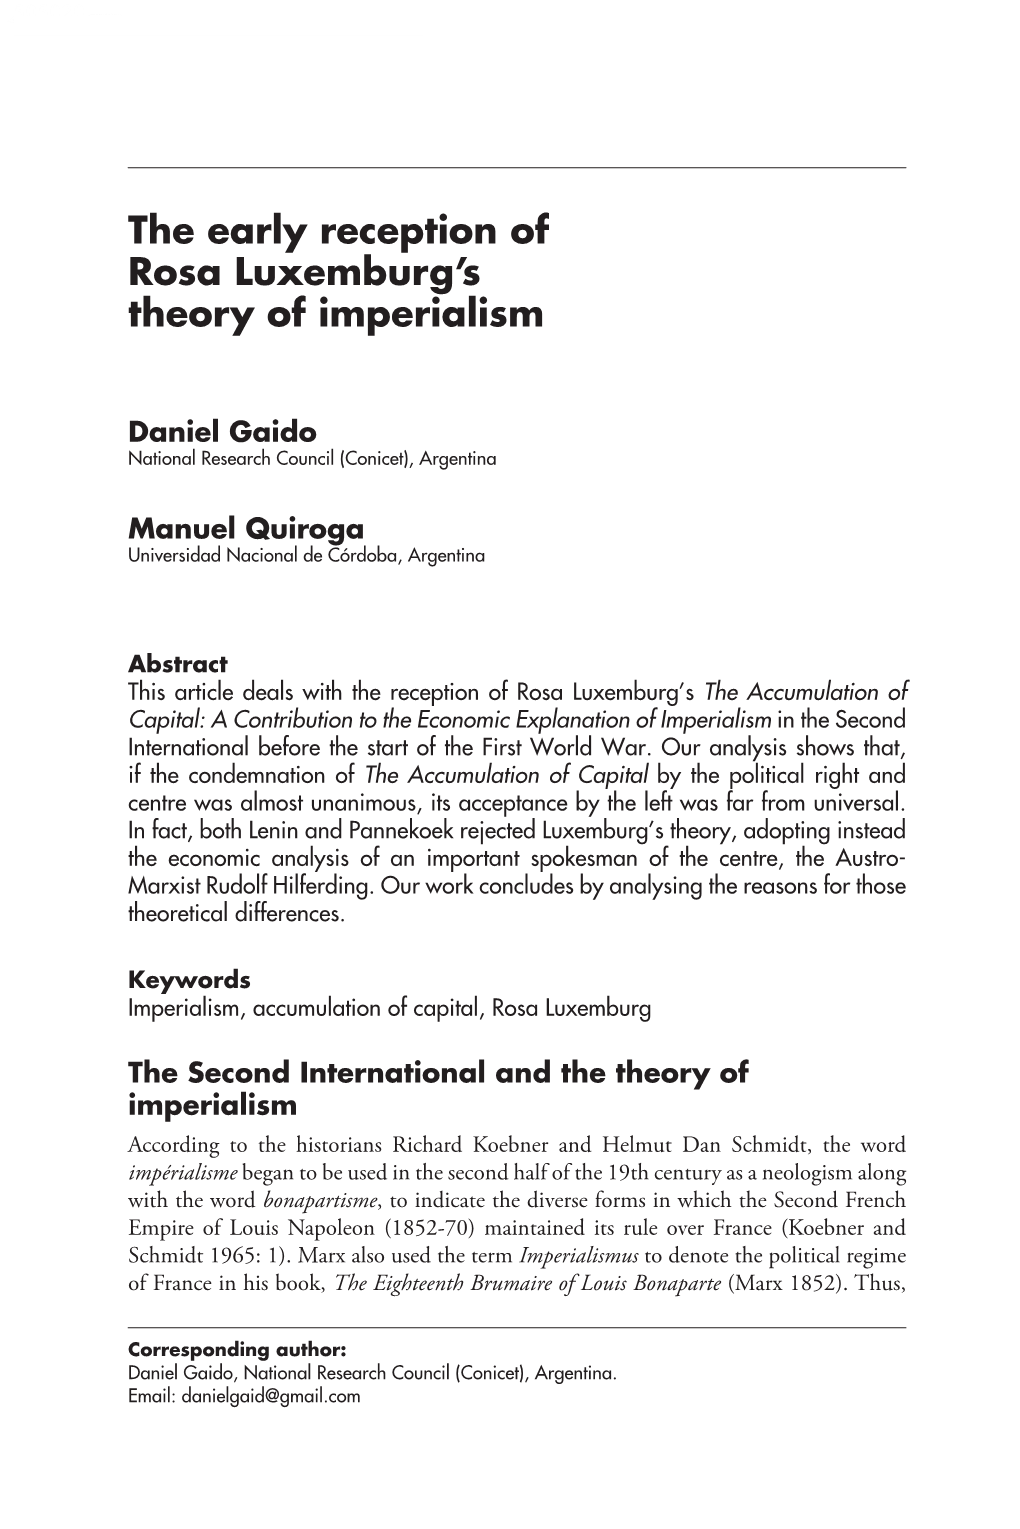 The Early Reception of Rosa Luxemburg's Theory of Imperialism